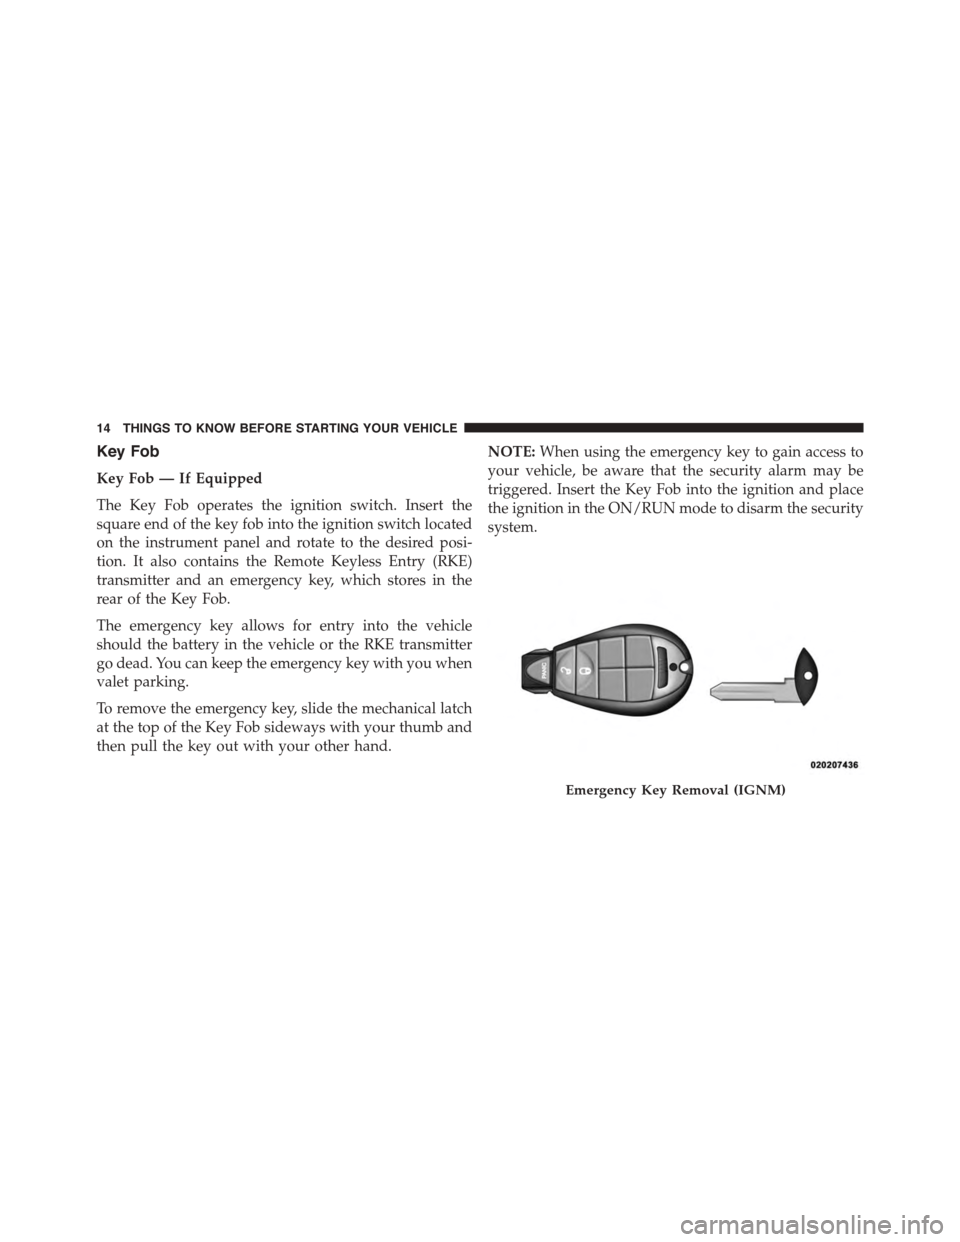 Ram 1500 2015 User Guide Key Fob
Key Fob — If Equipped
The Key Fob operates the ignition switch. Insert the
square end of the key fob into the ignition switch located
on the instrument panel and rotate to the desired posi-
